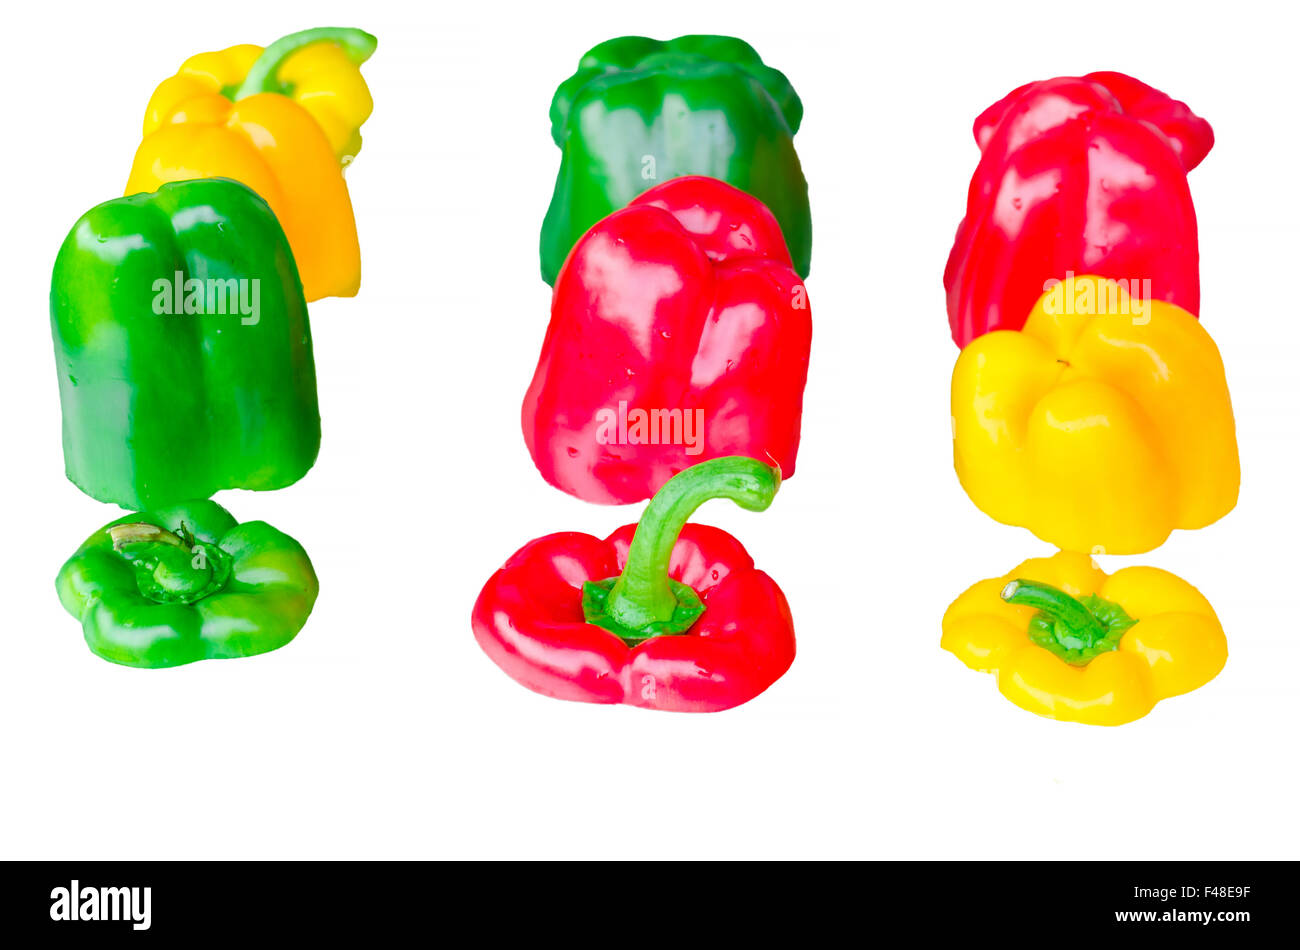 Yellow, Red, Green Bell Pepper Stock Photo